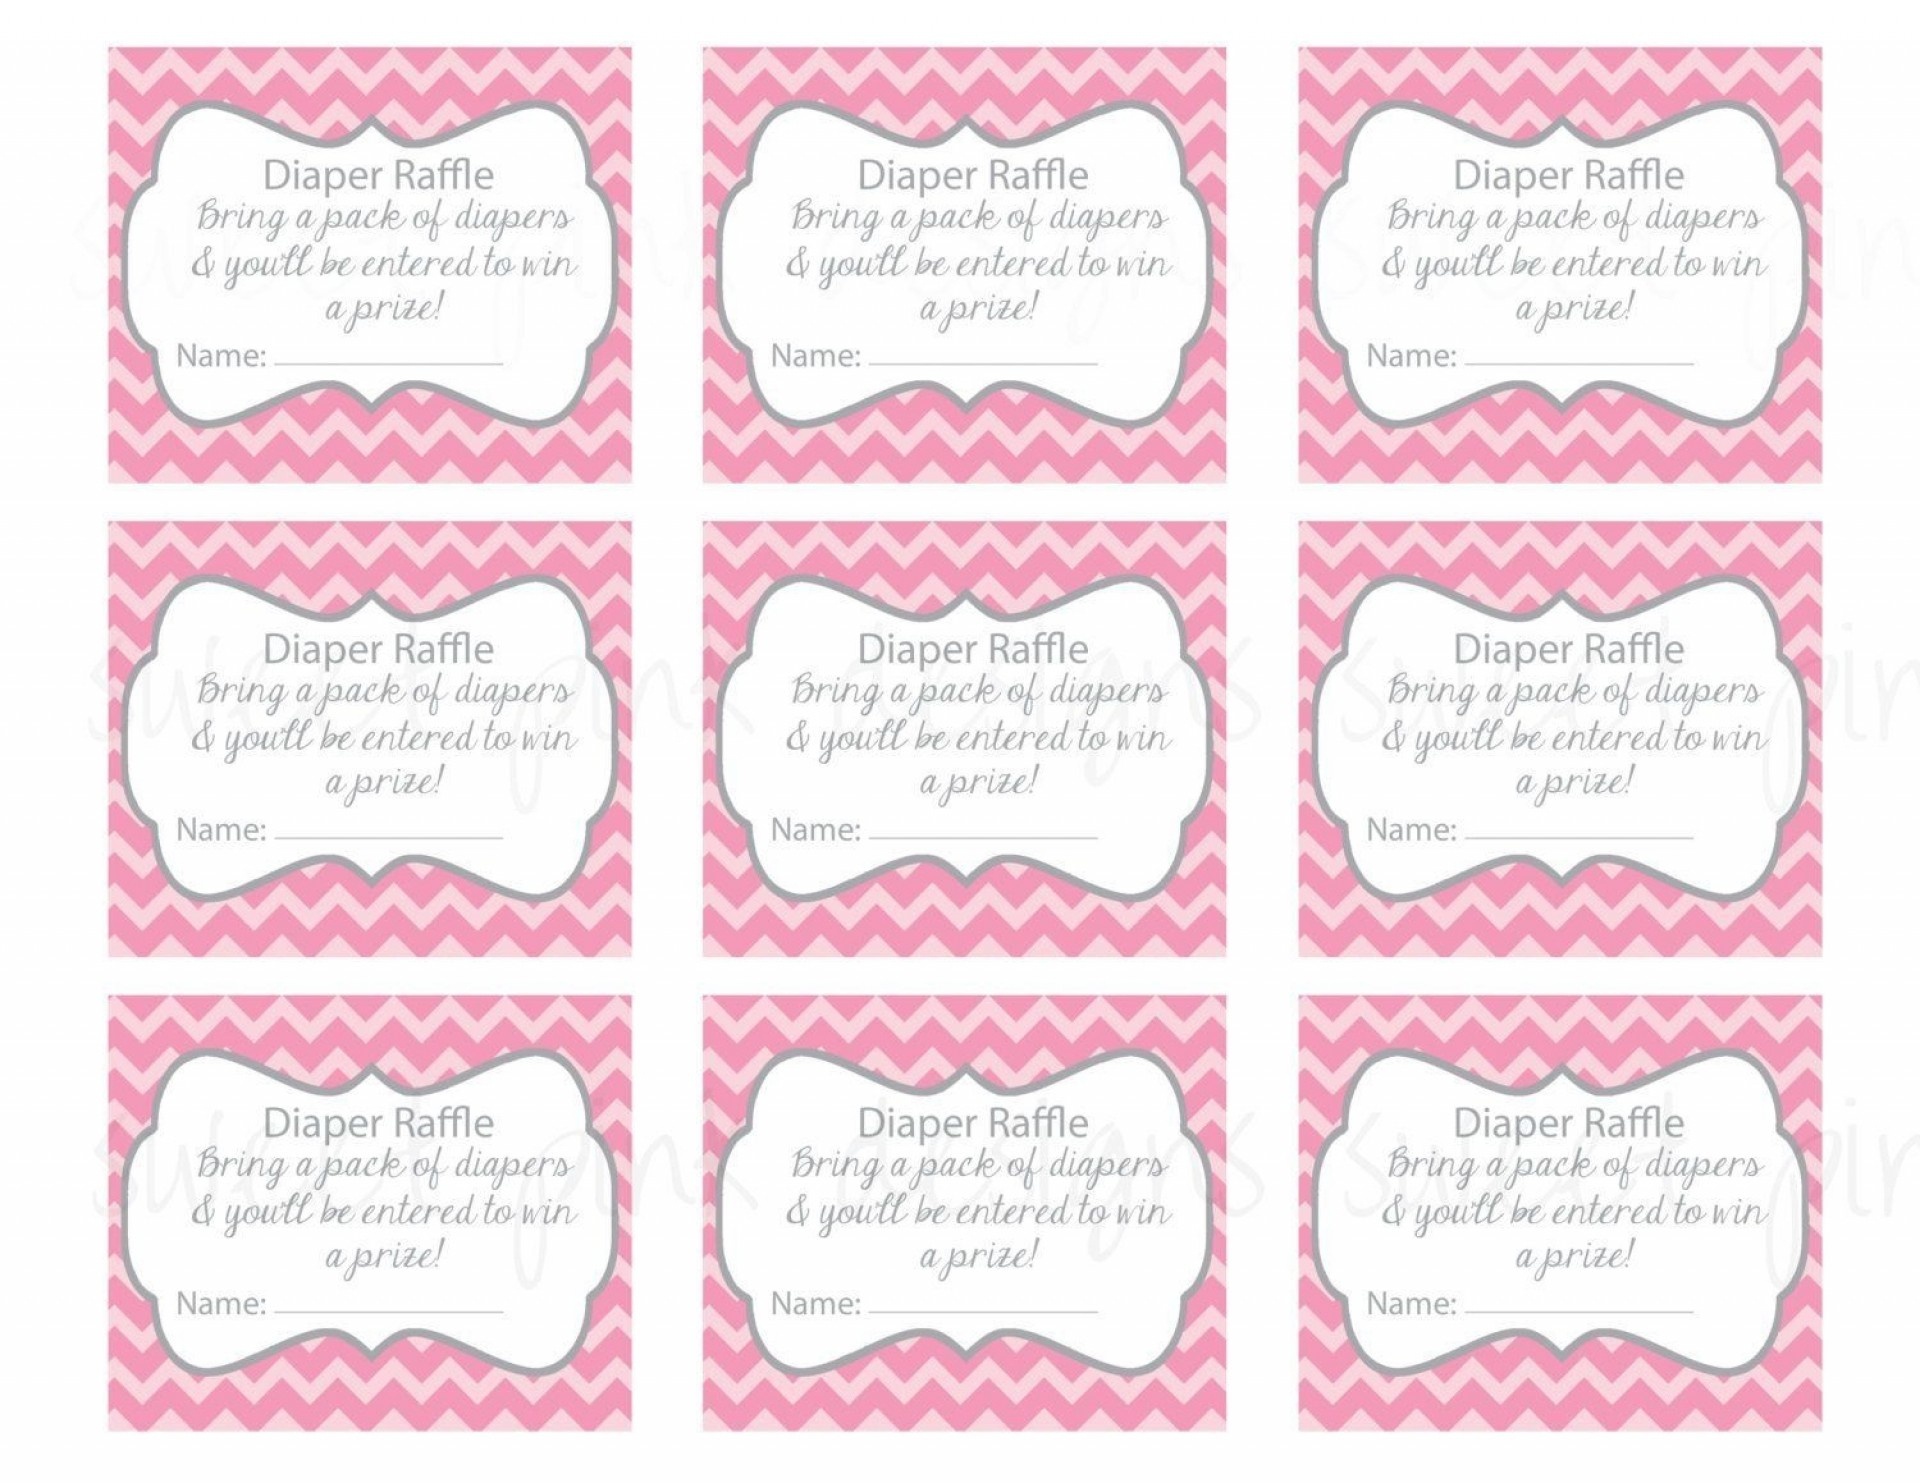 019 Free Printable Raffle Ticket Template Ideas Baby Shower Tickets - Free Printable Diaper Raffle Ticket Template Download